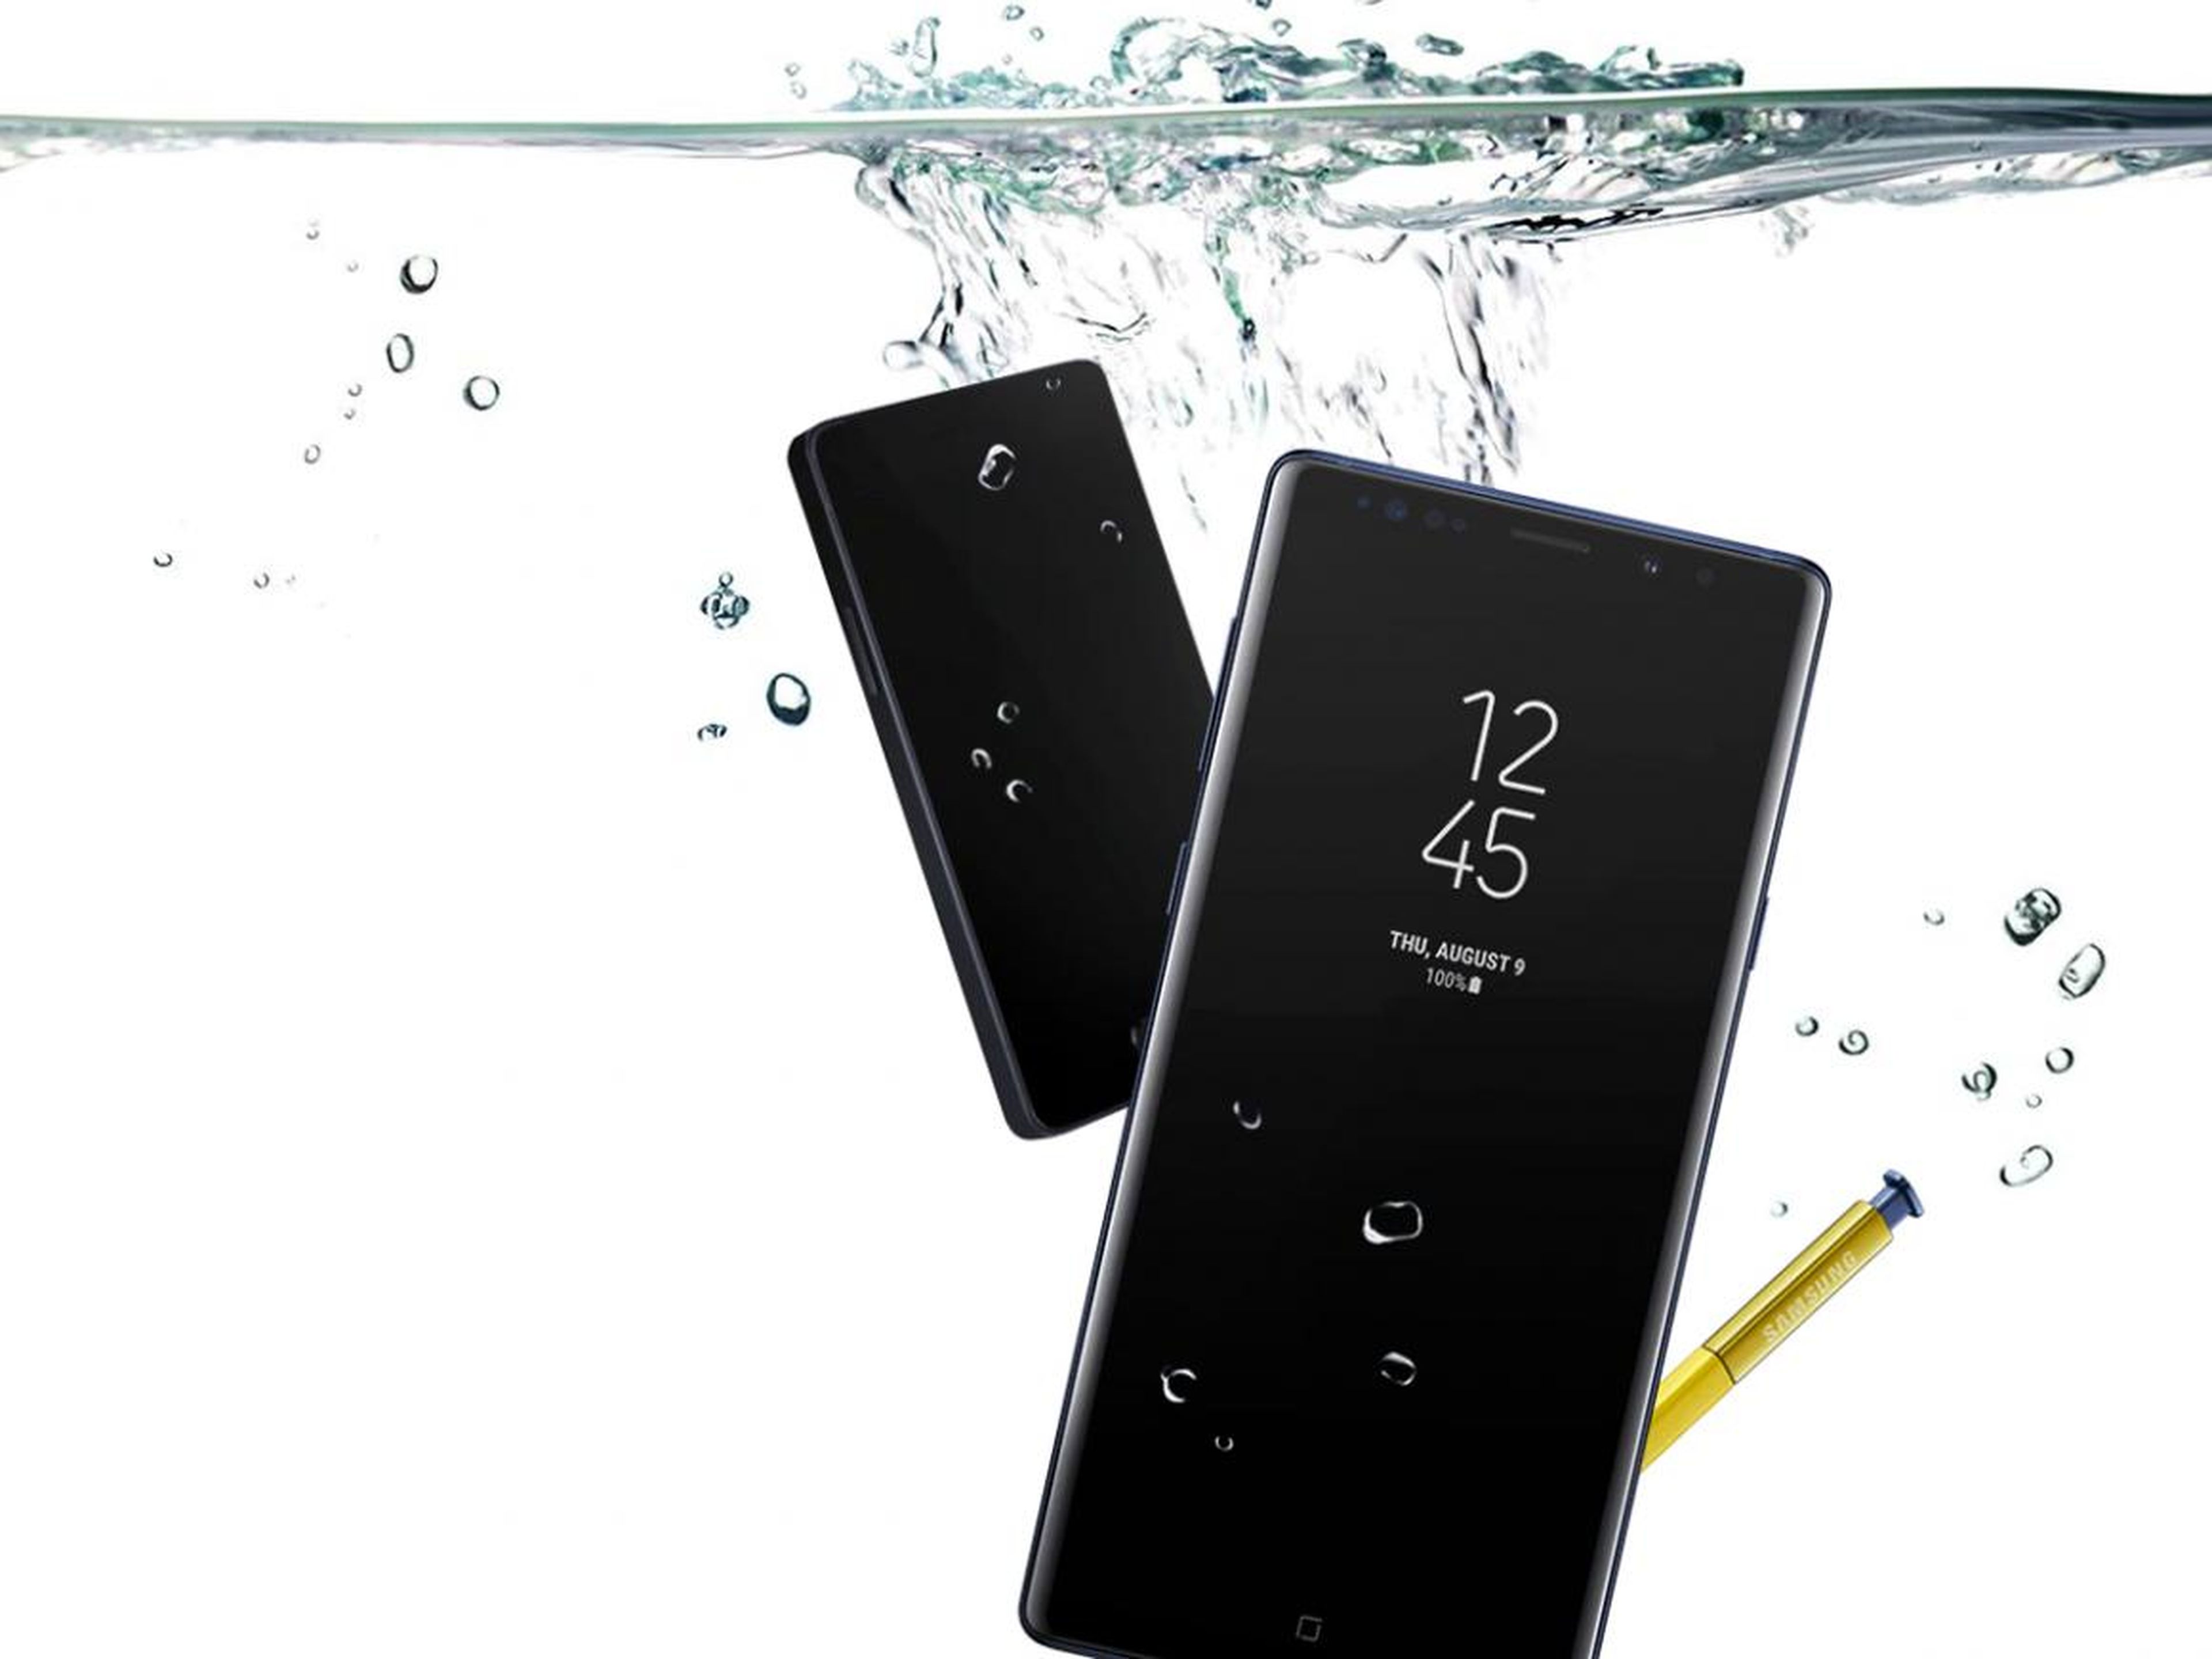 Both phones are water resistant, with the Galaxy Note 9 boasting a little extra resistance.